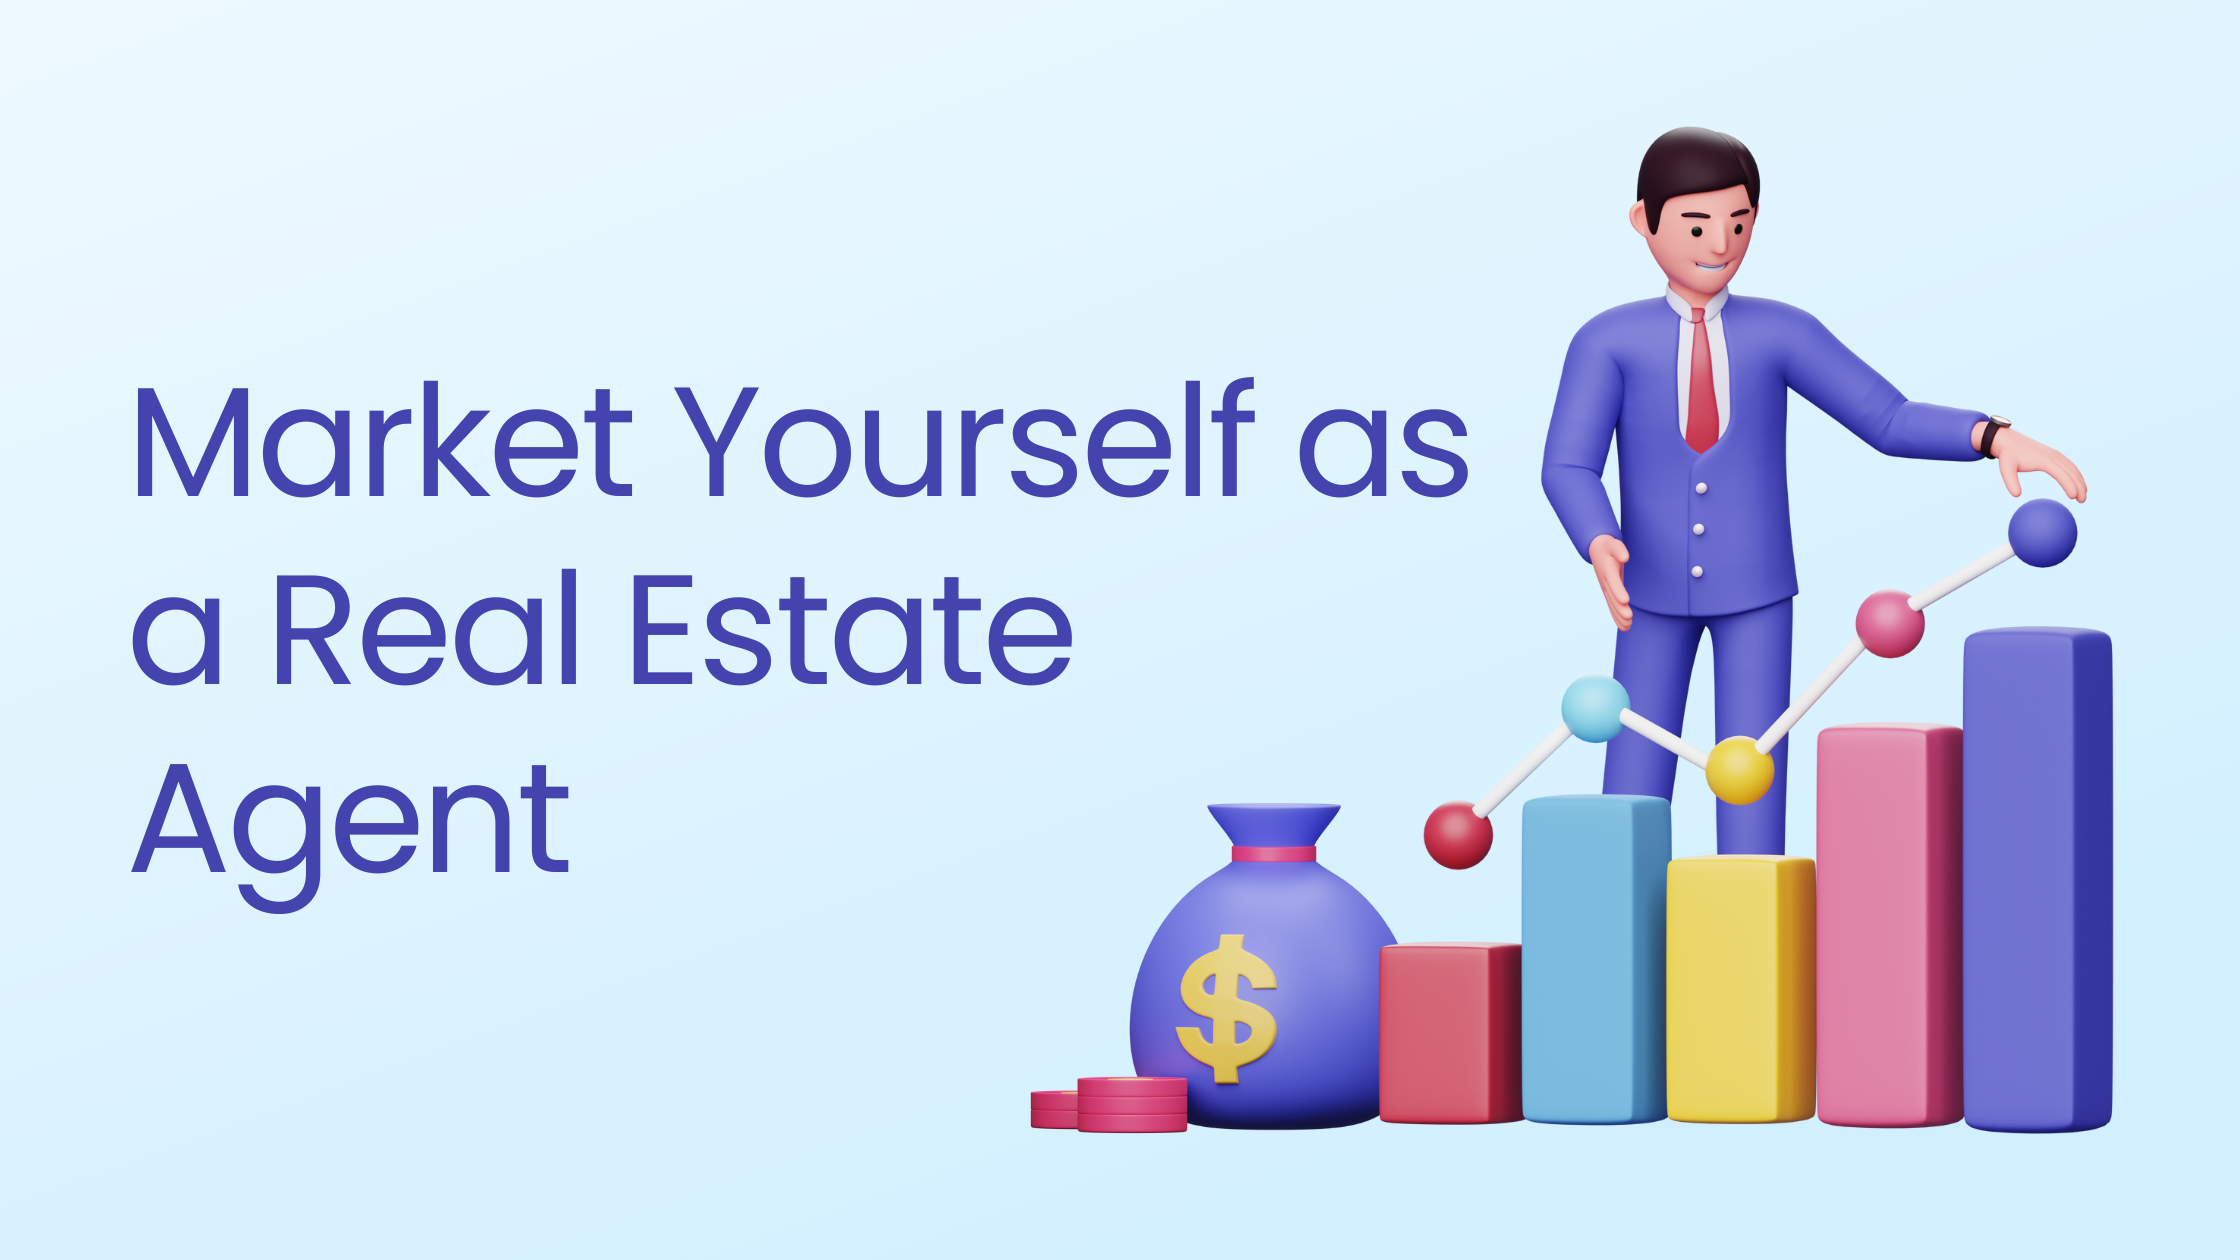 How to market yourself as real estate agent